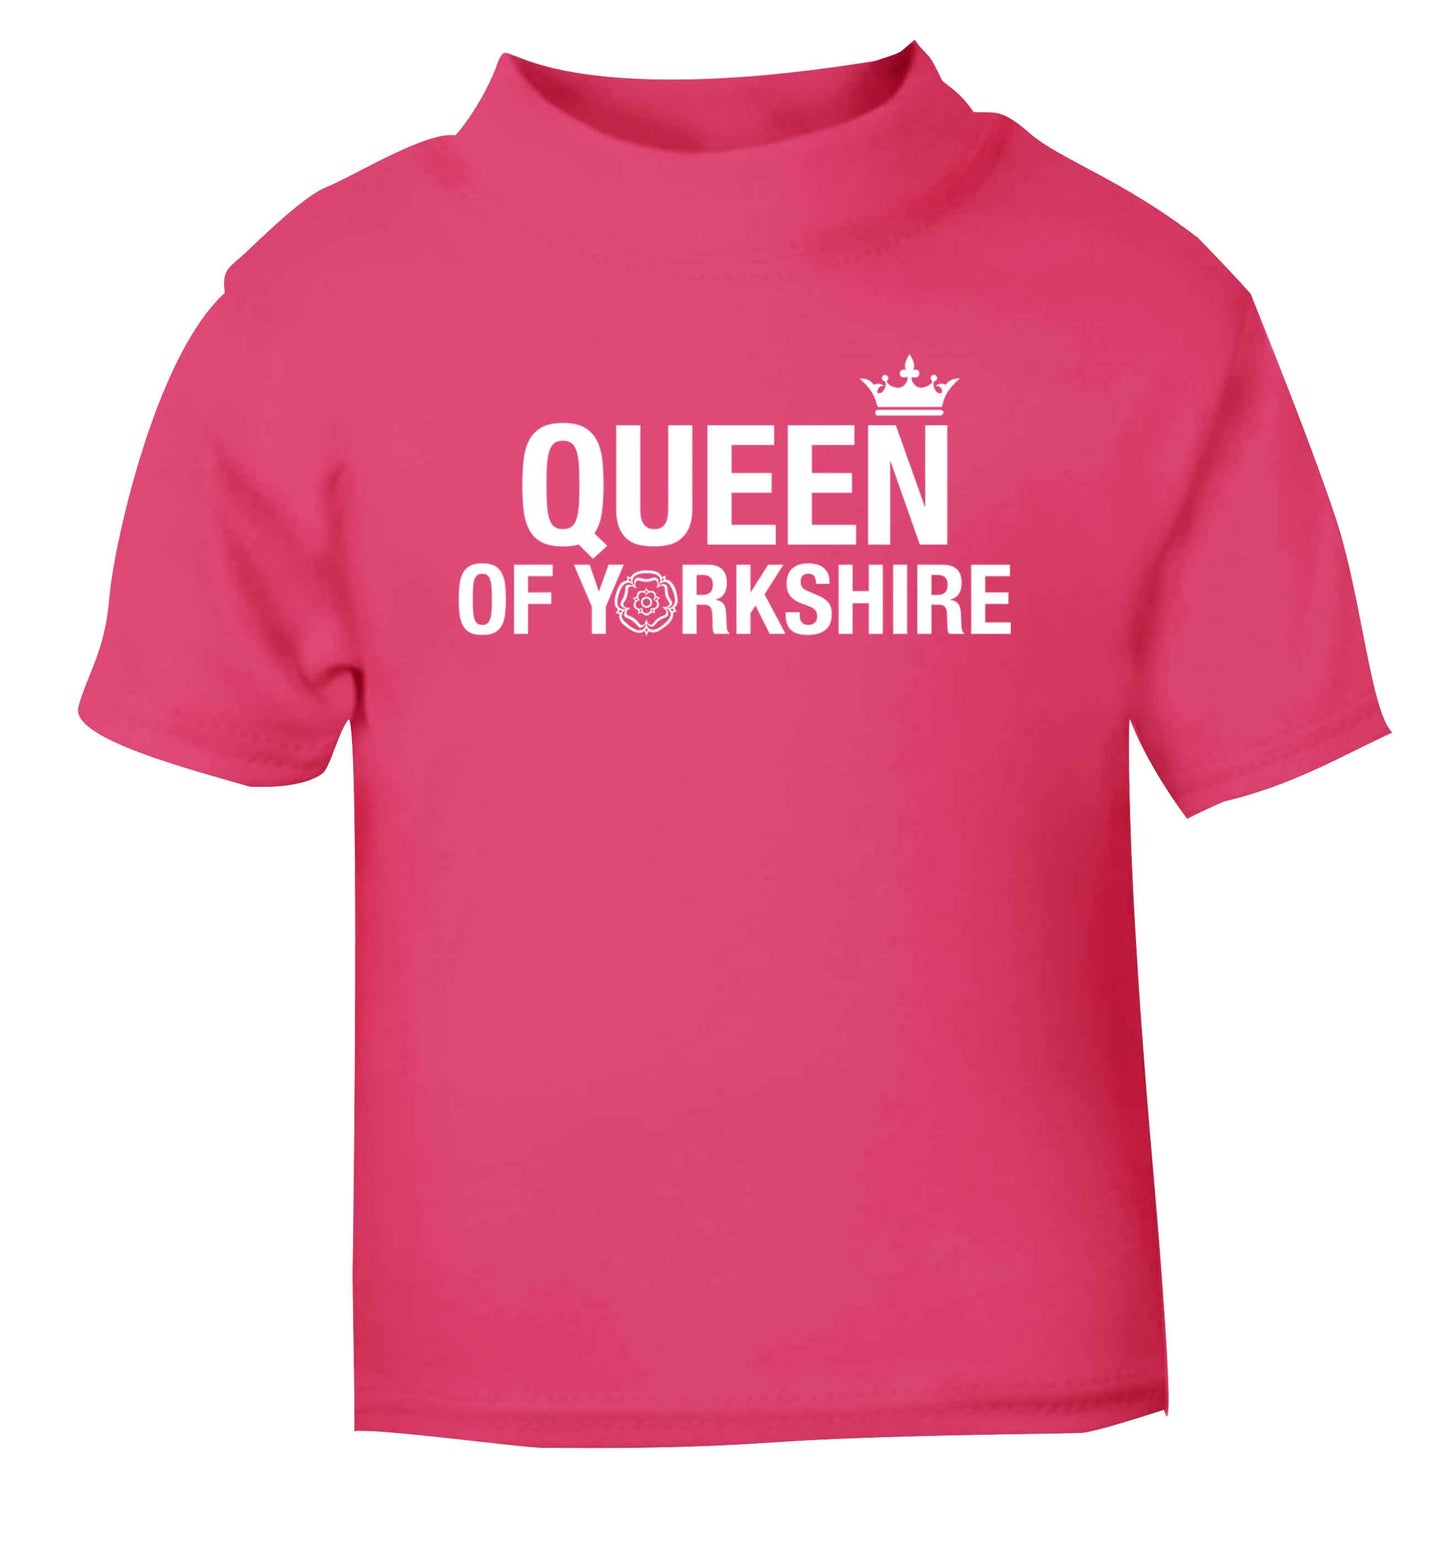 Queen of Yorkshire pink Baby Toddler Tshirt 2 Years